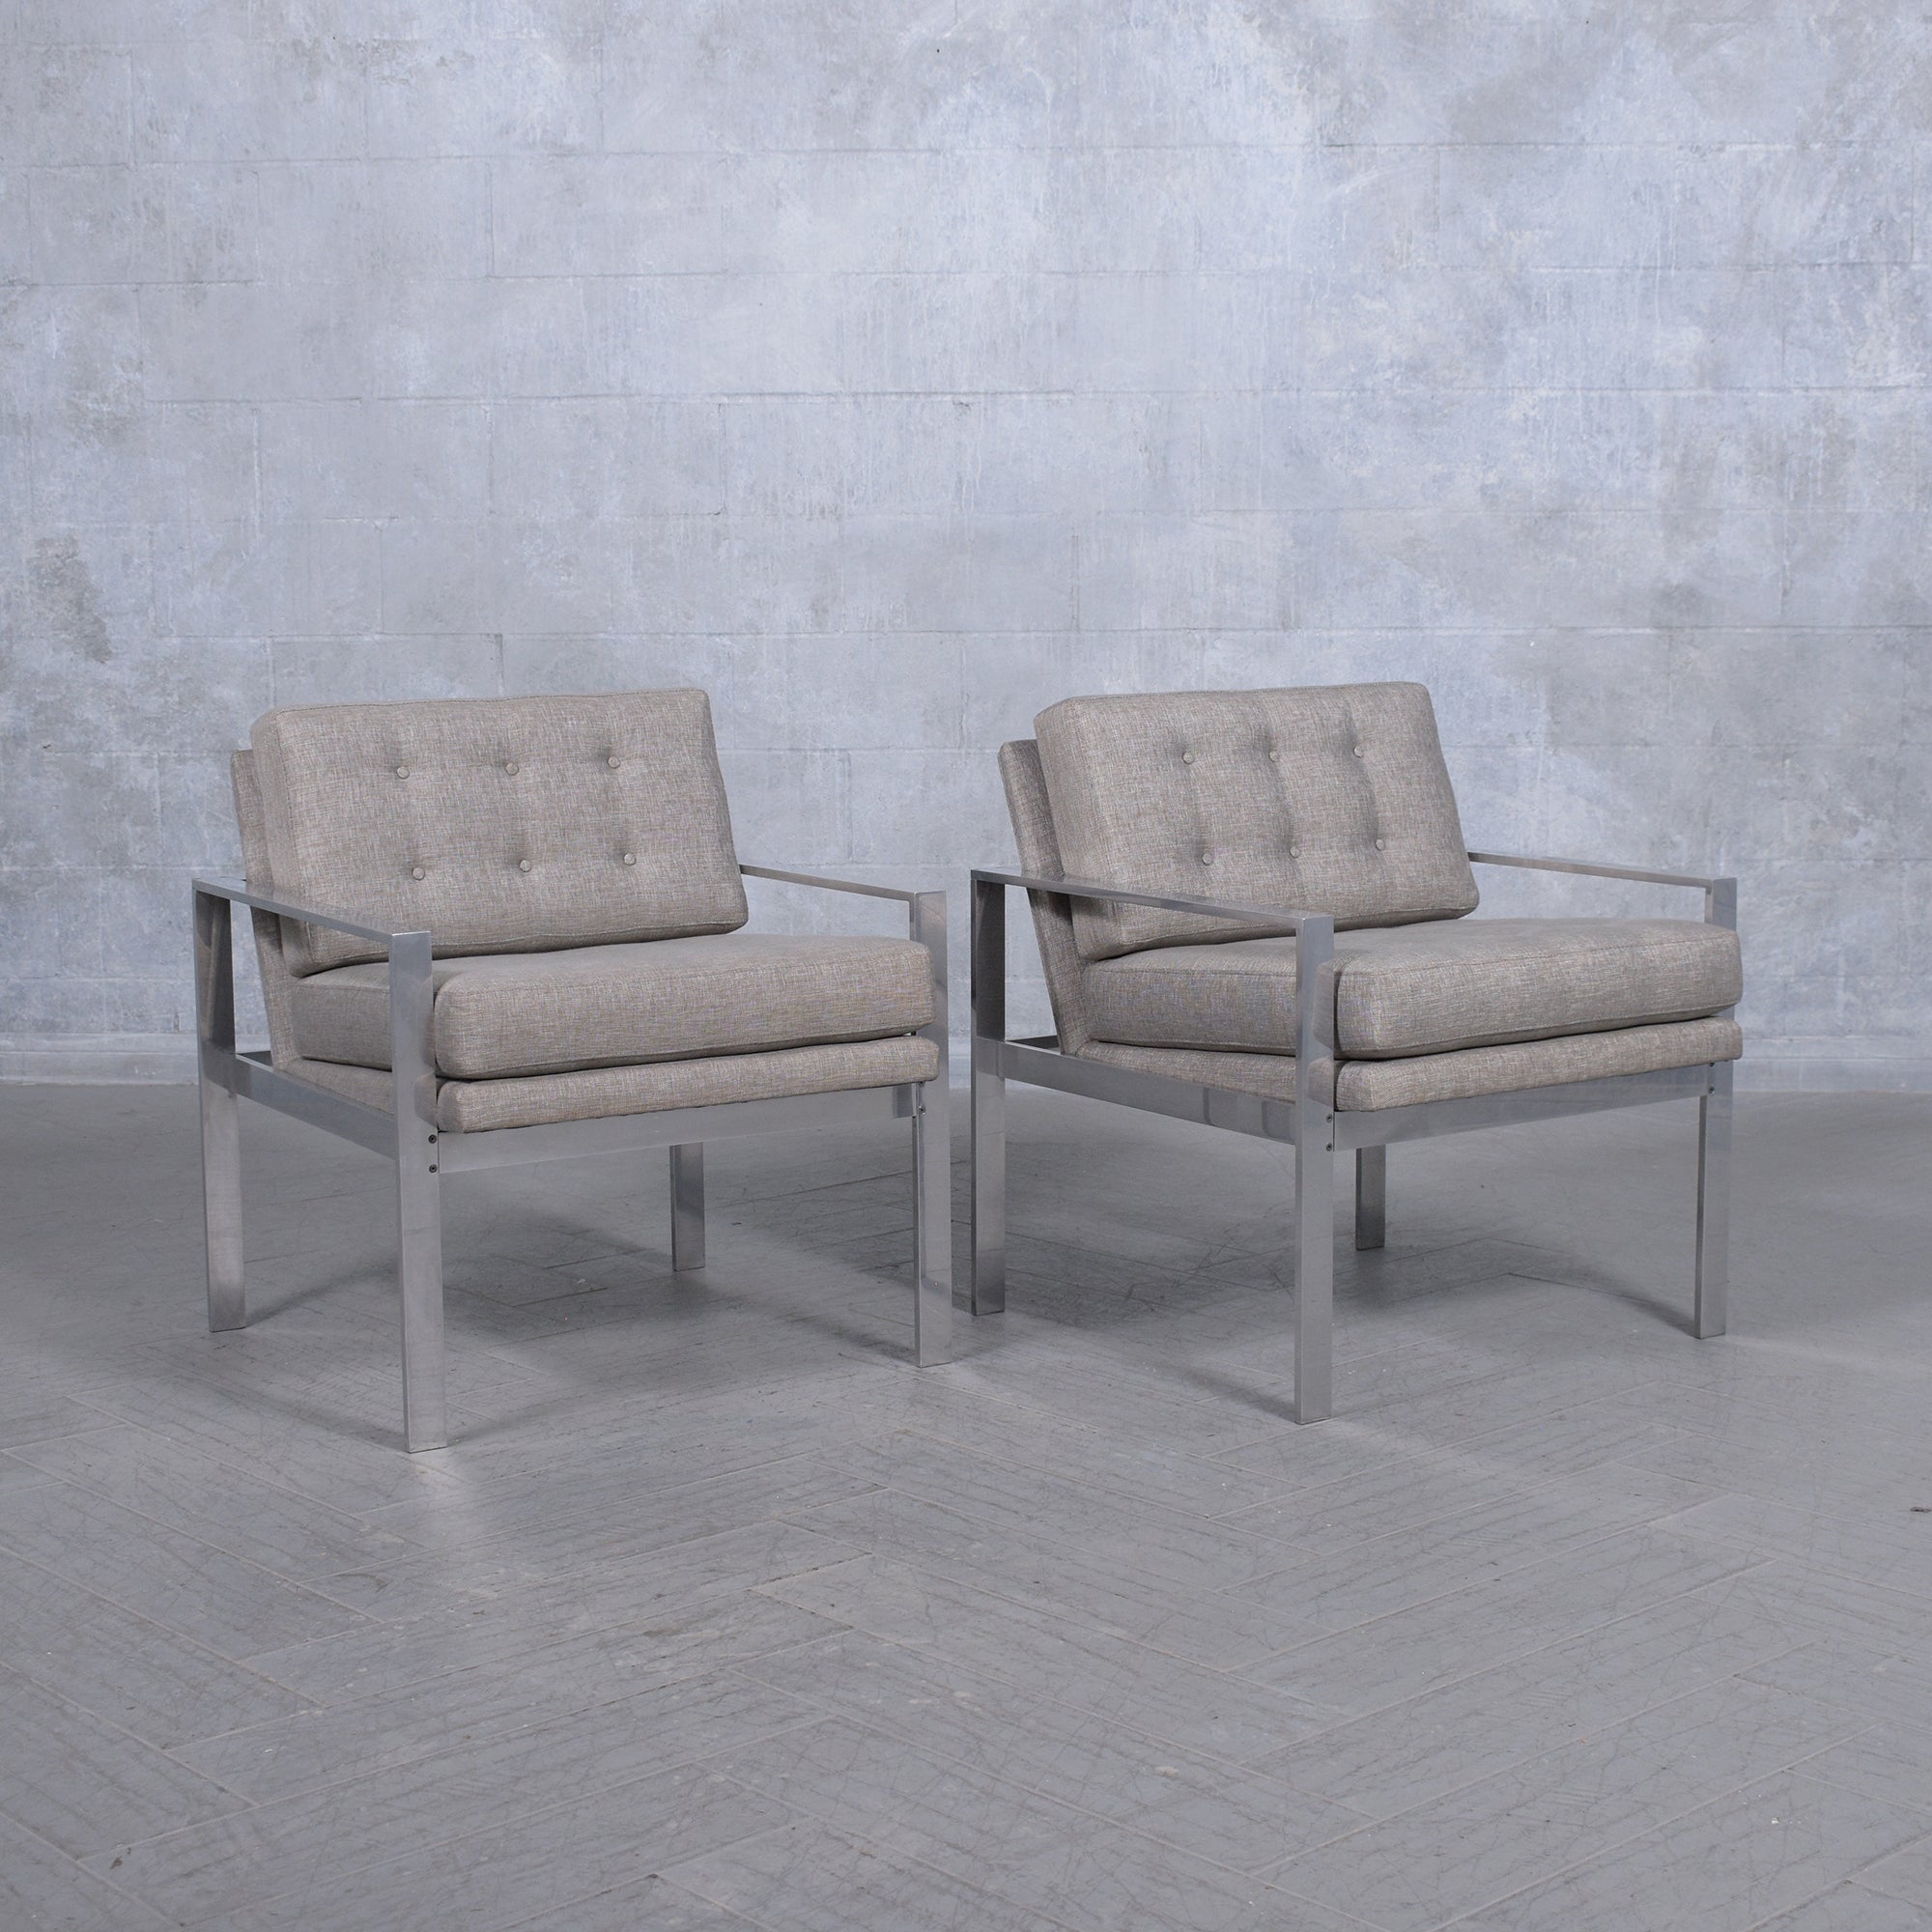 Dive into the timeless elegance of mid-century modern design with our meticulously restored pair of Milo Baughman lounge chairs. These iconic pieces, celebrated for their classic style and unmatched comfort, have been rejuvenated by our expert